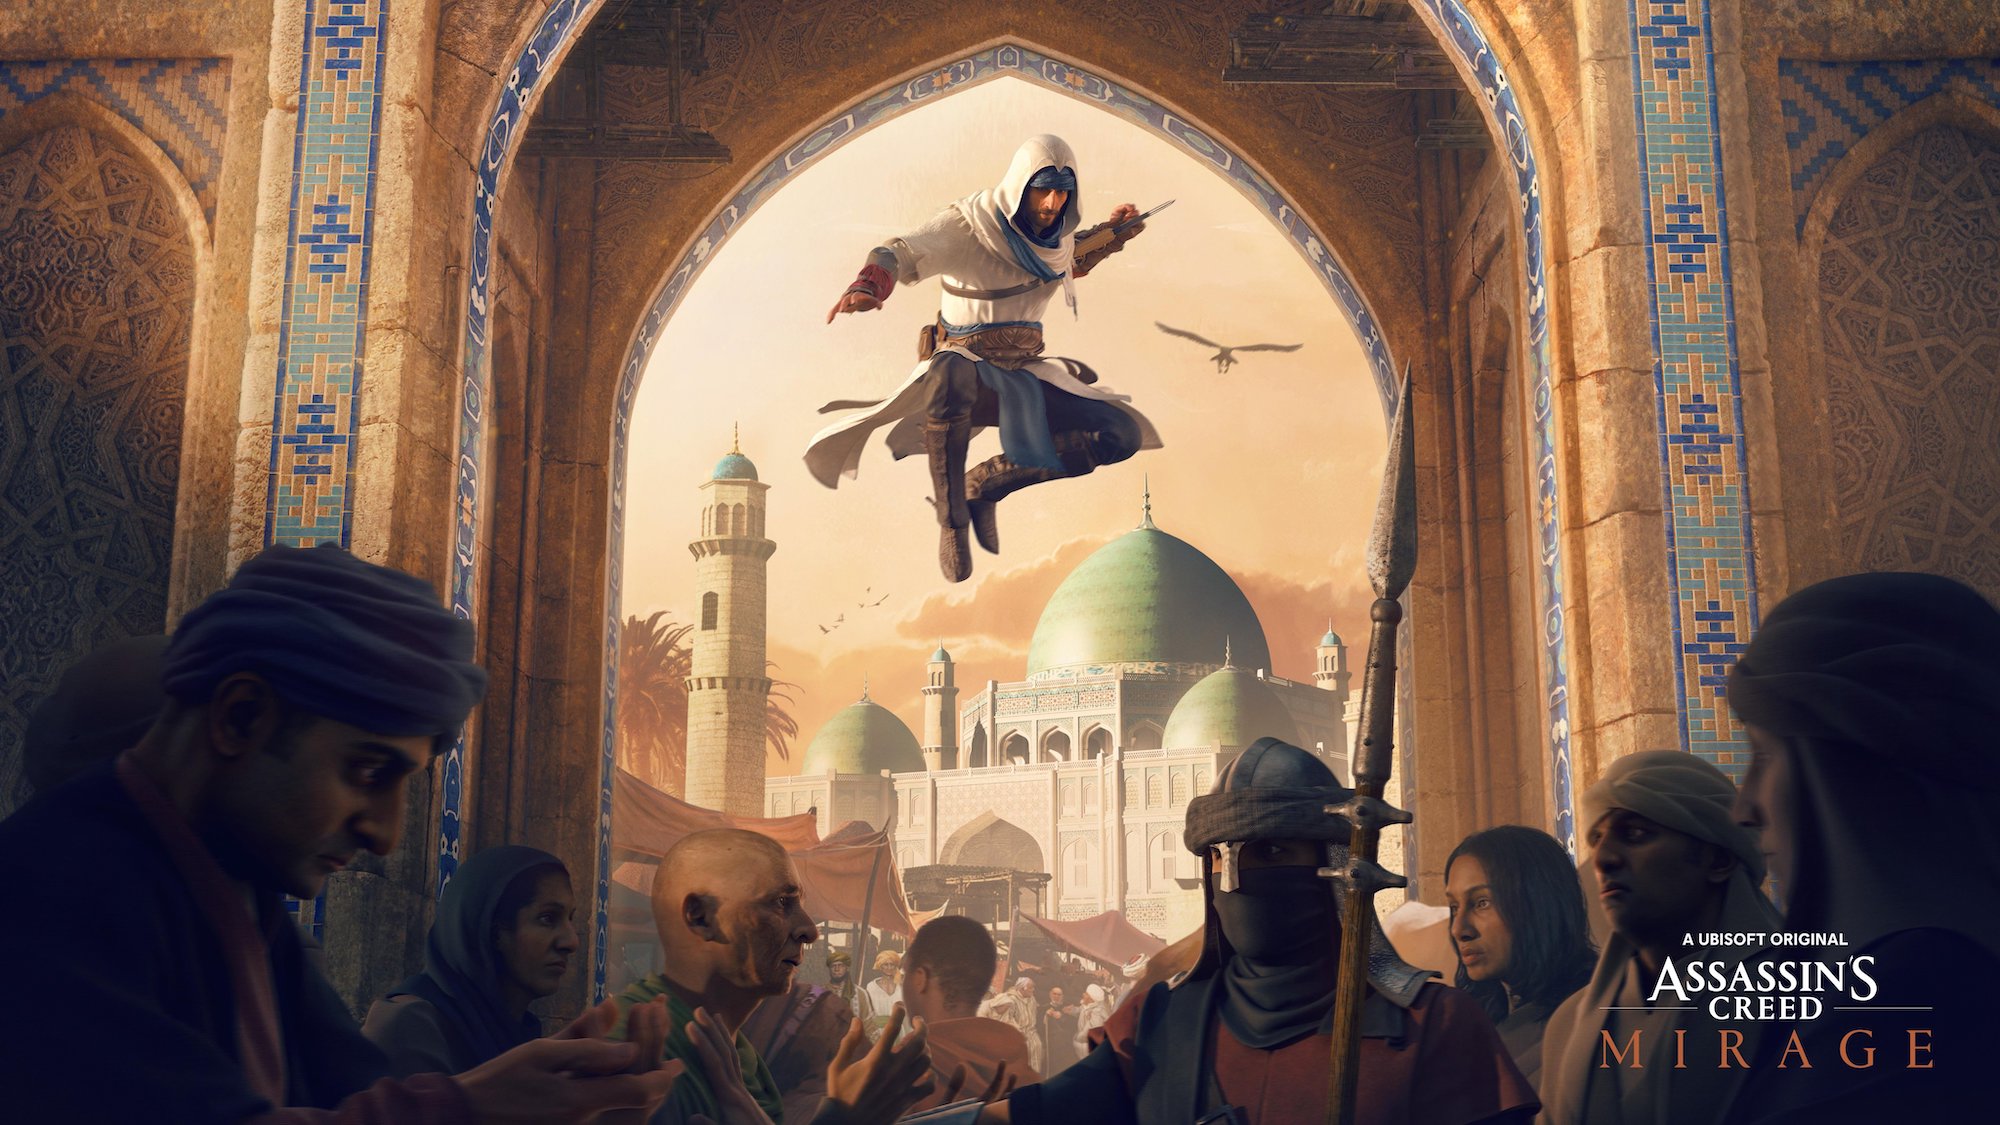 Forget Hexe and Red, I hope Assassin's Creed never goes RPG again